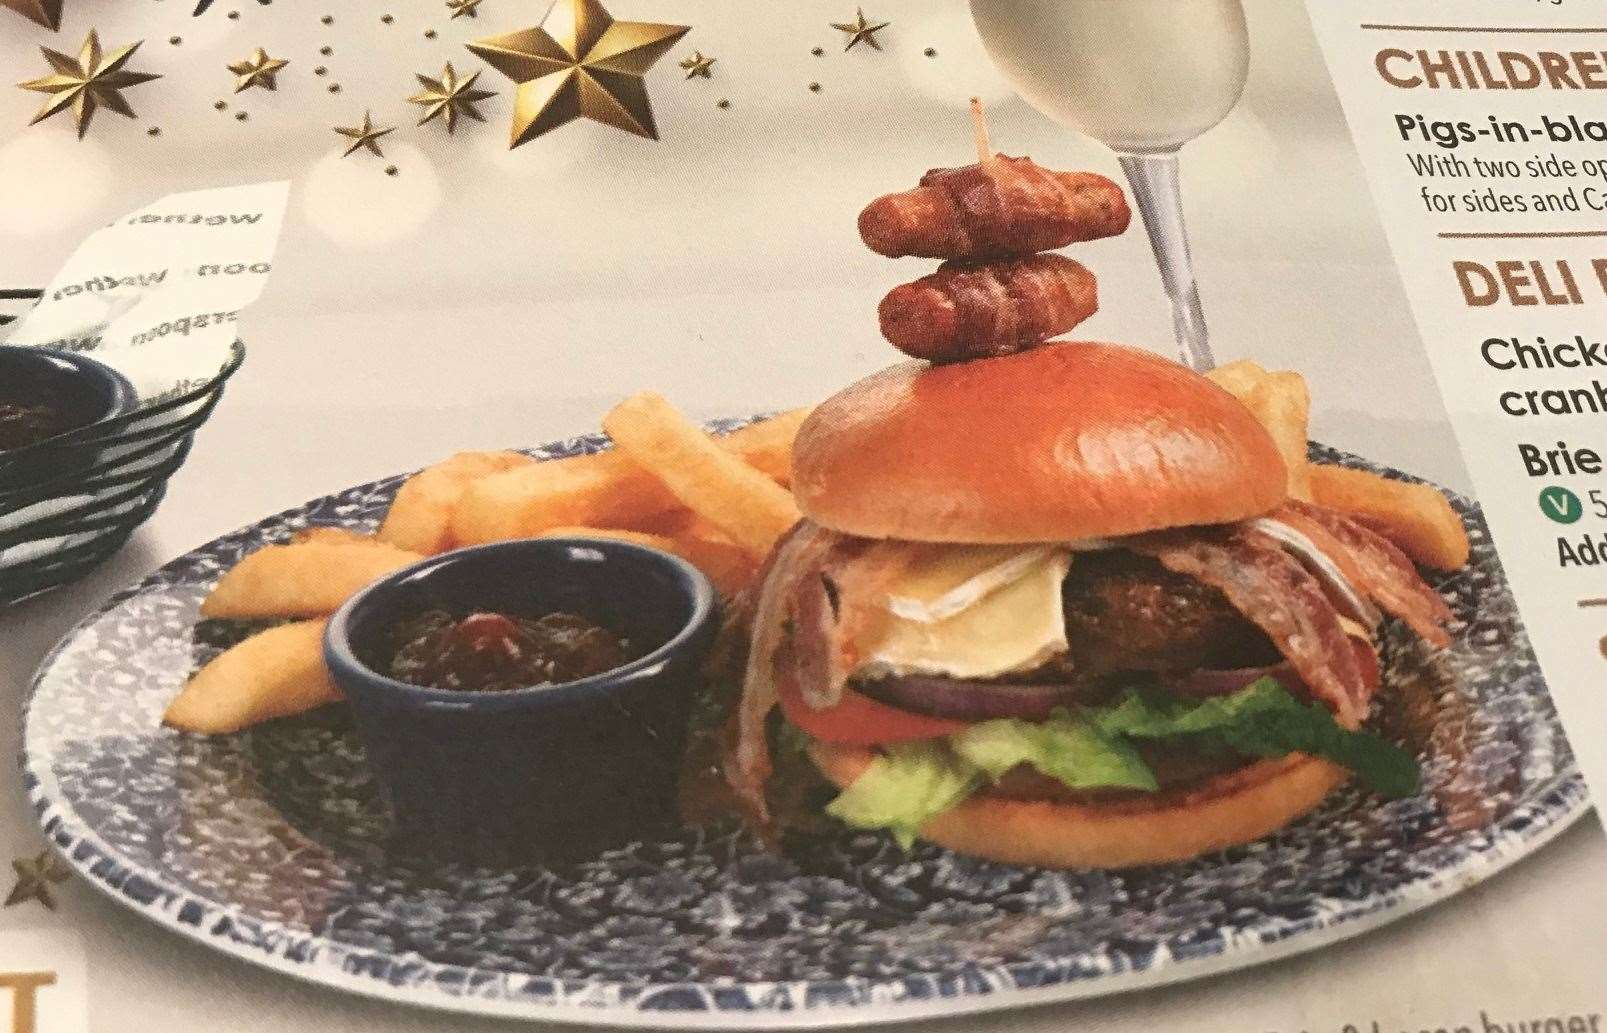 This is how the burger looked on the promotional leaflet...